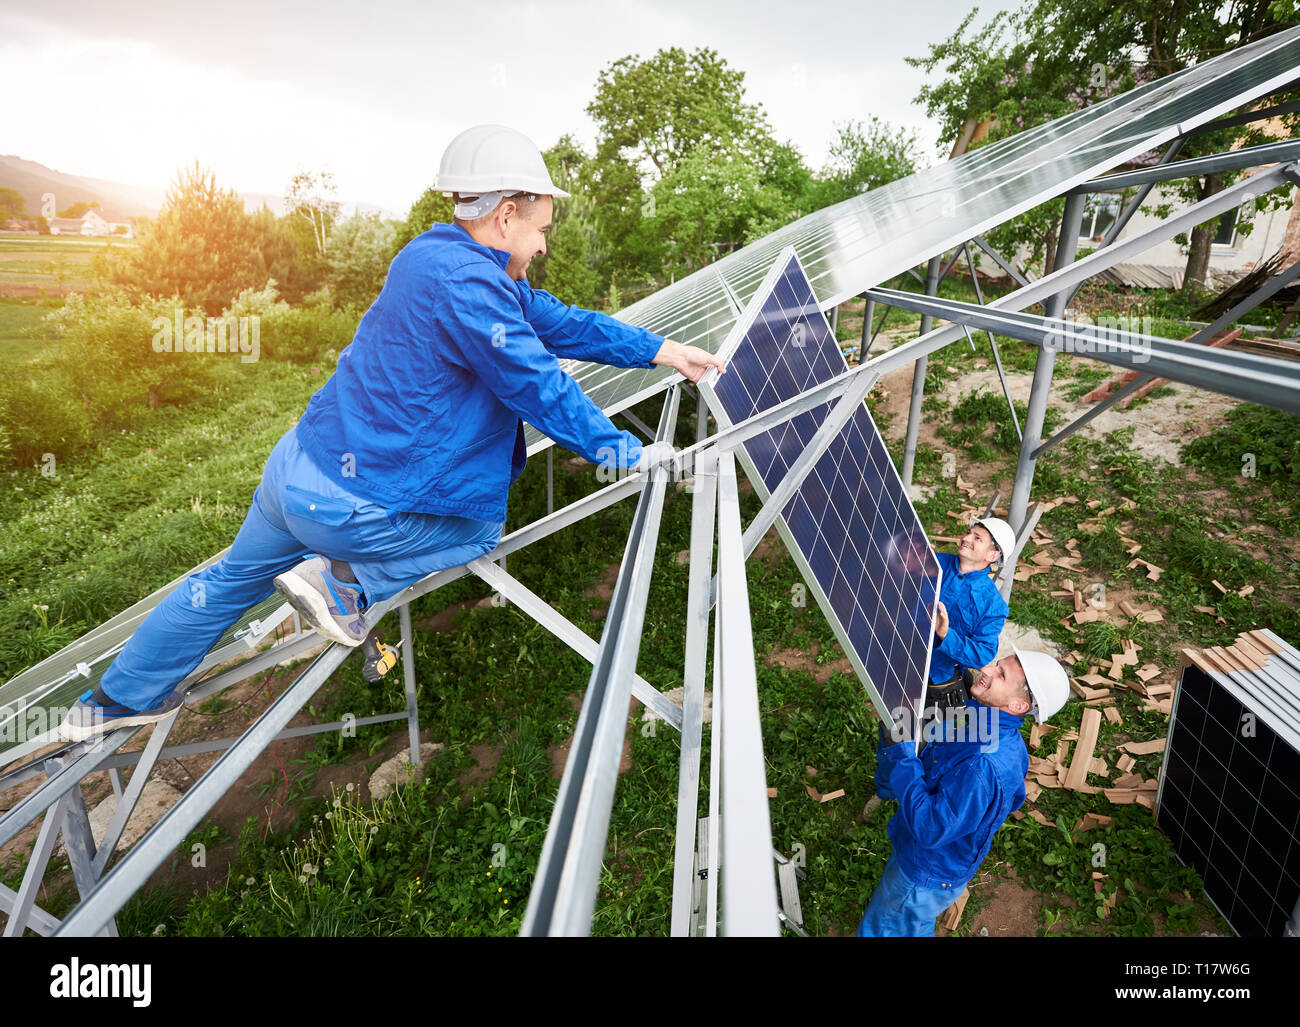 Installing of stand-alone solar photo voltaic panel system. Team of three technicians in hard-hats mounting the solar module on platform on green summ Stock Photo